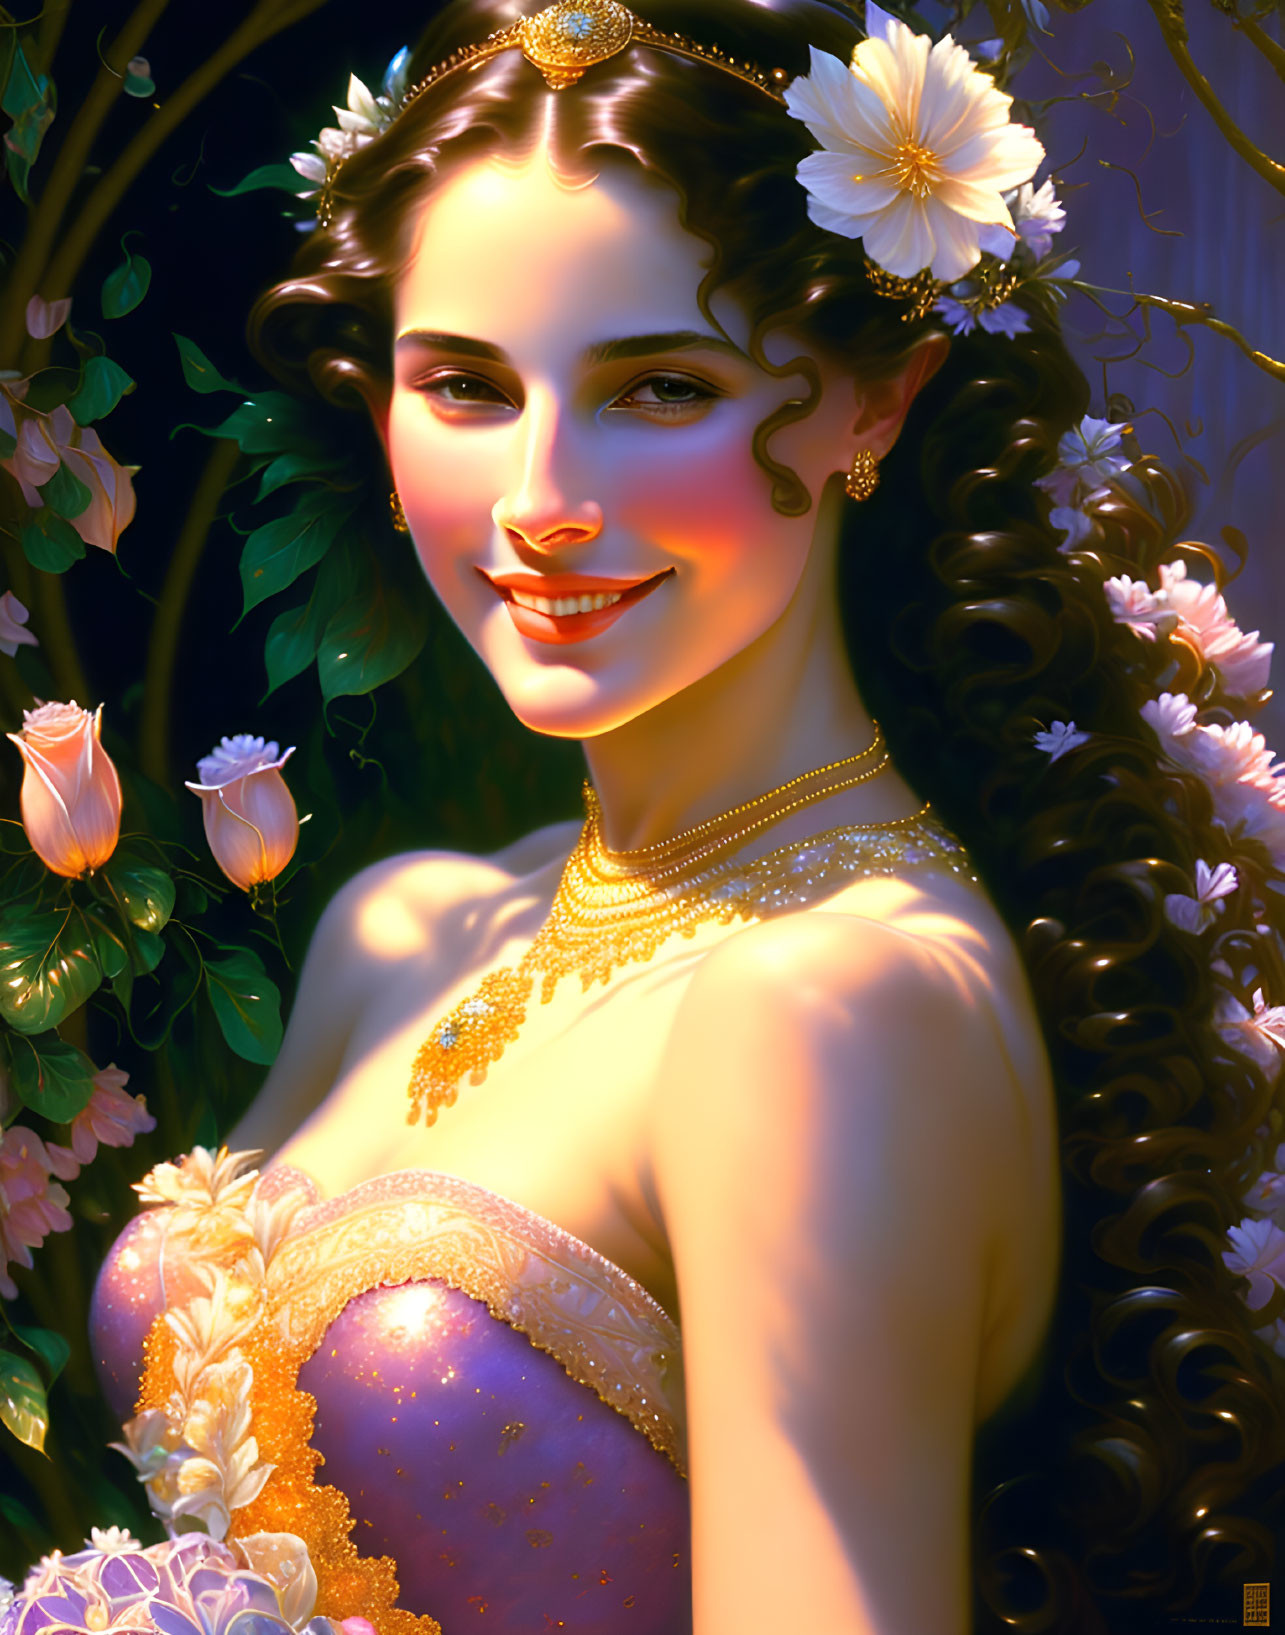 Illustrated woman with dark hair in floral tiara and sparkly purple dress among lush flowers